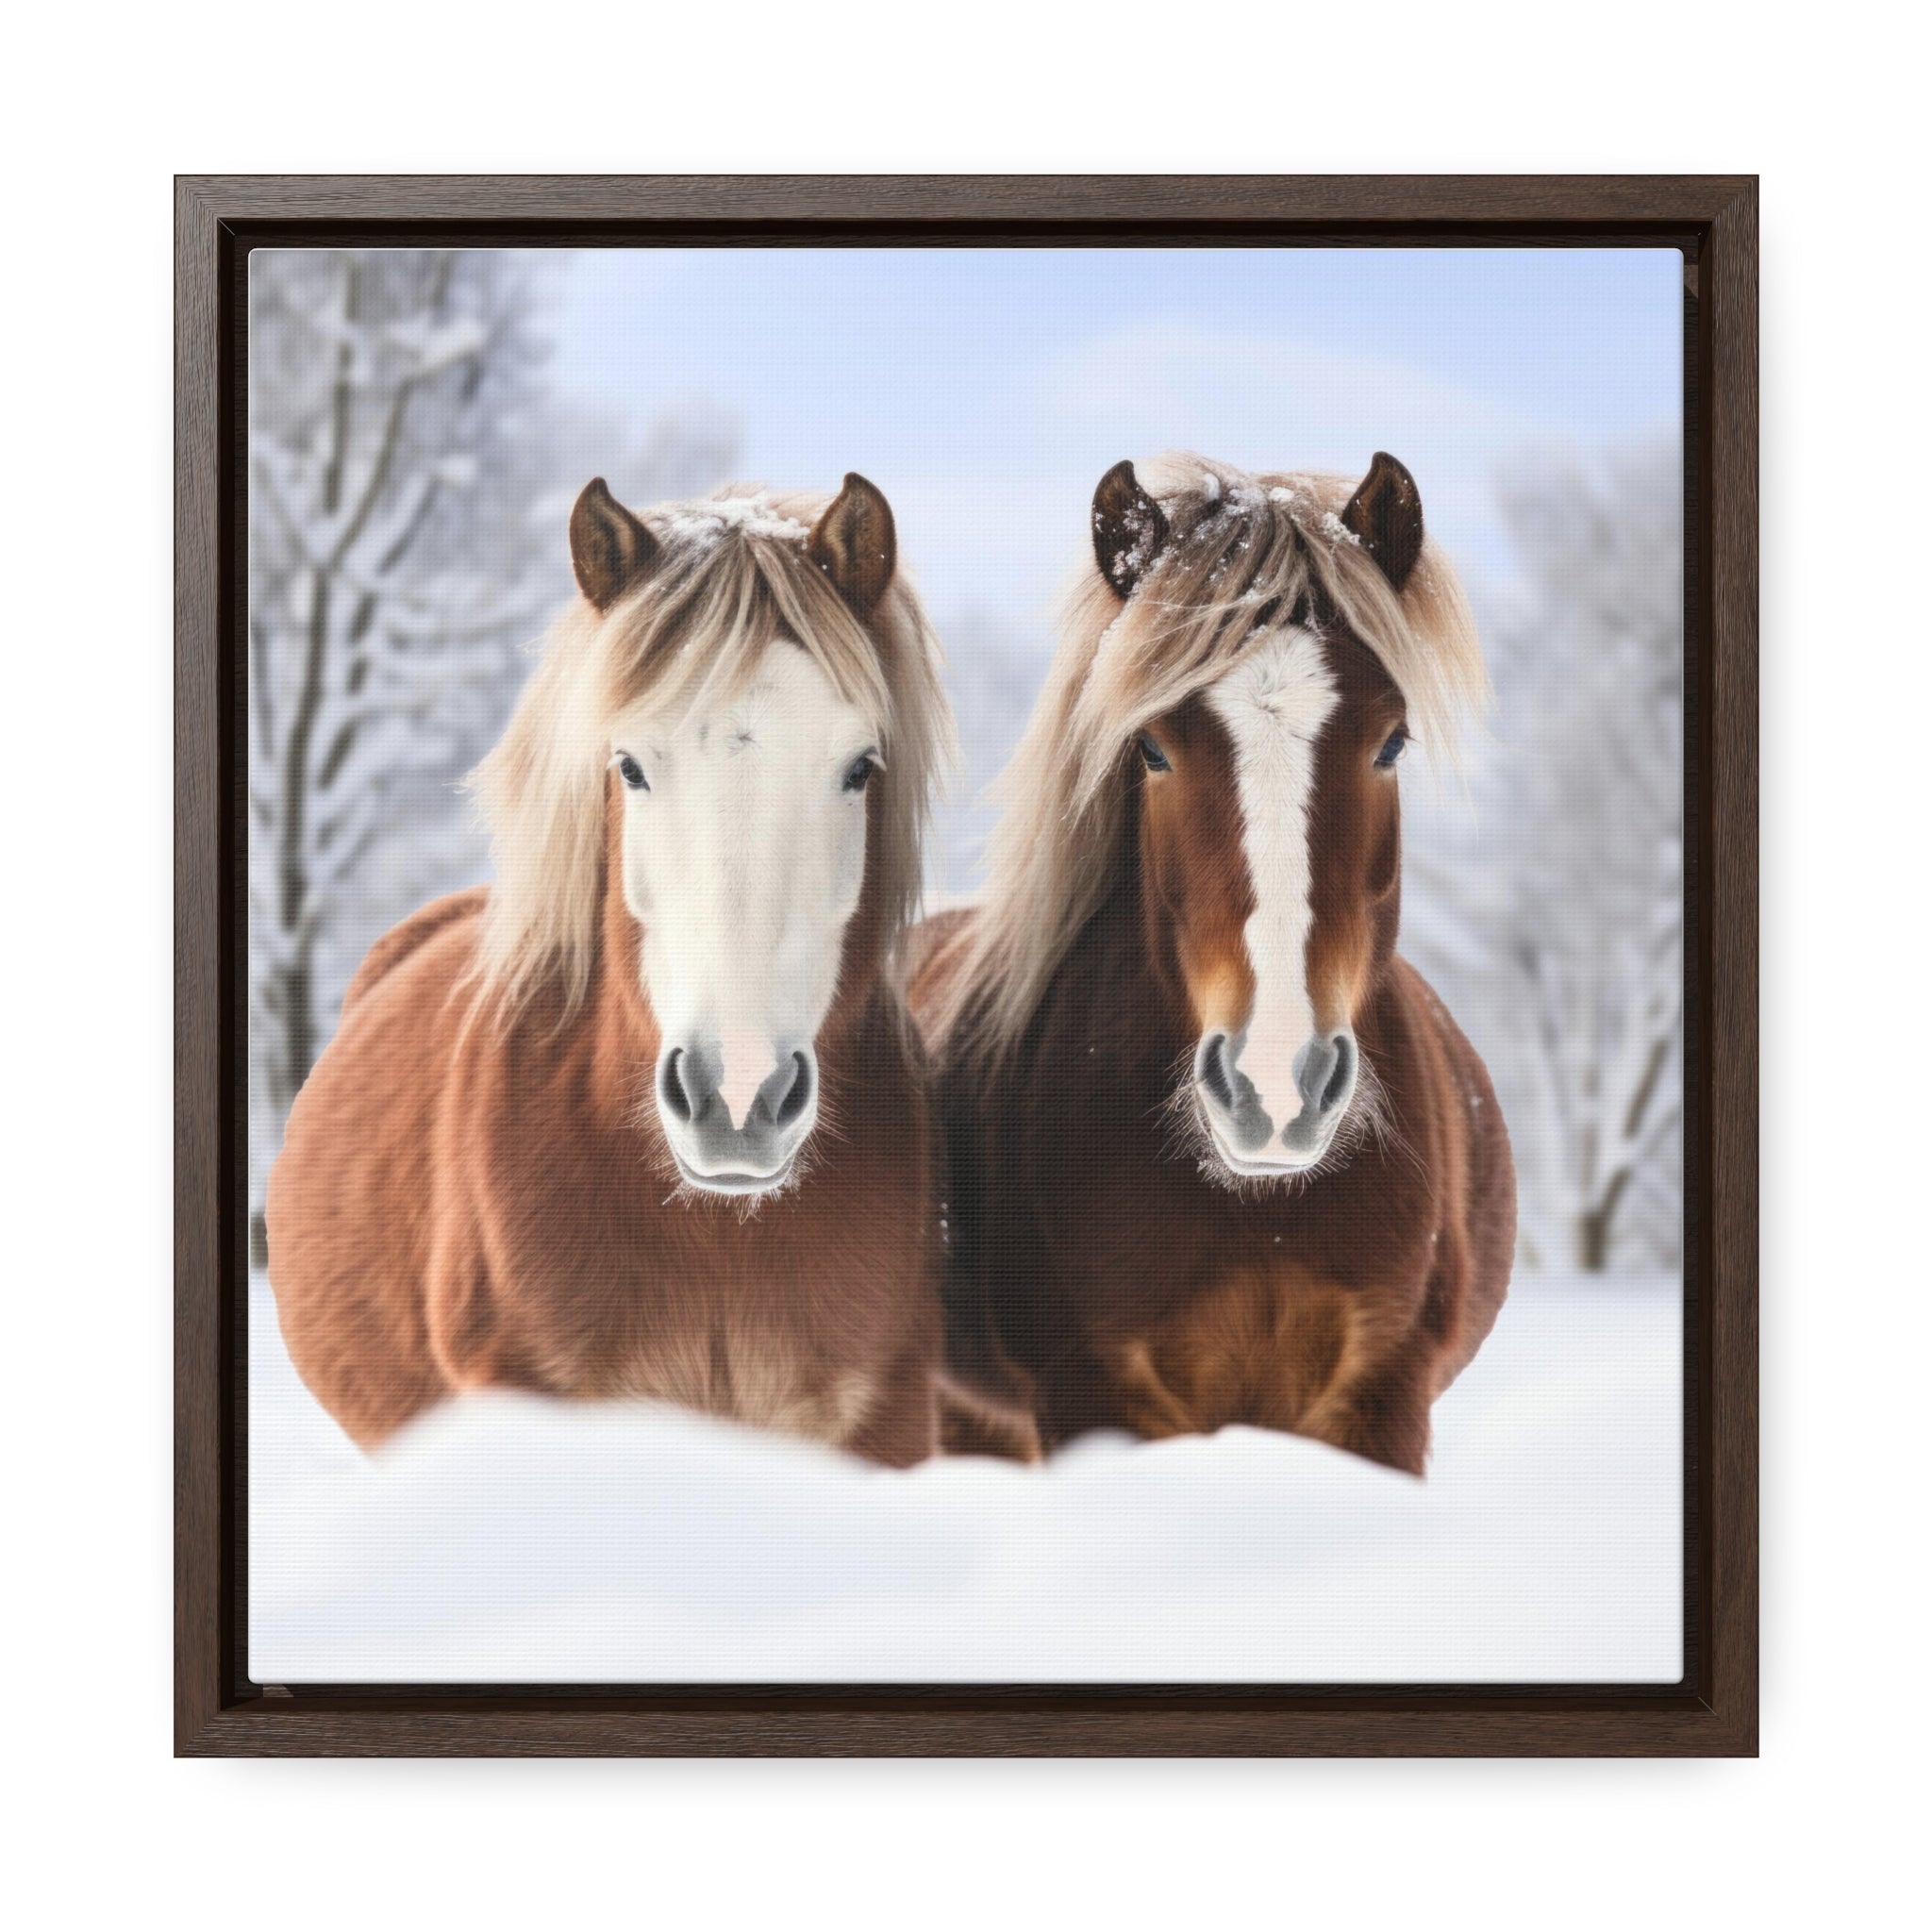 Sticking Together | Gallery Canvas Wraps, Square Frame